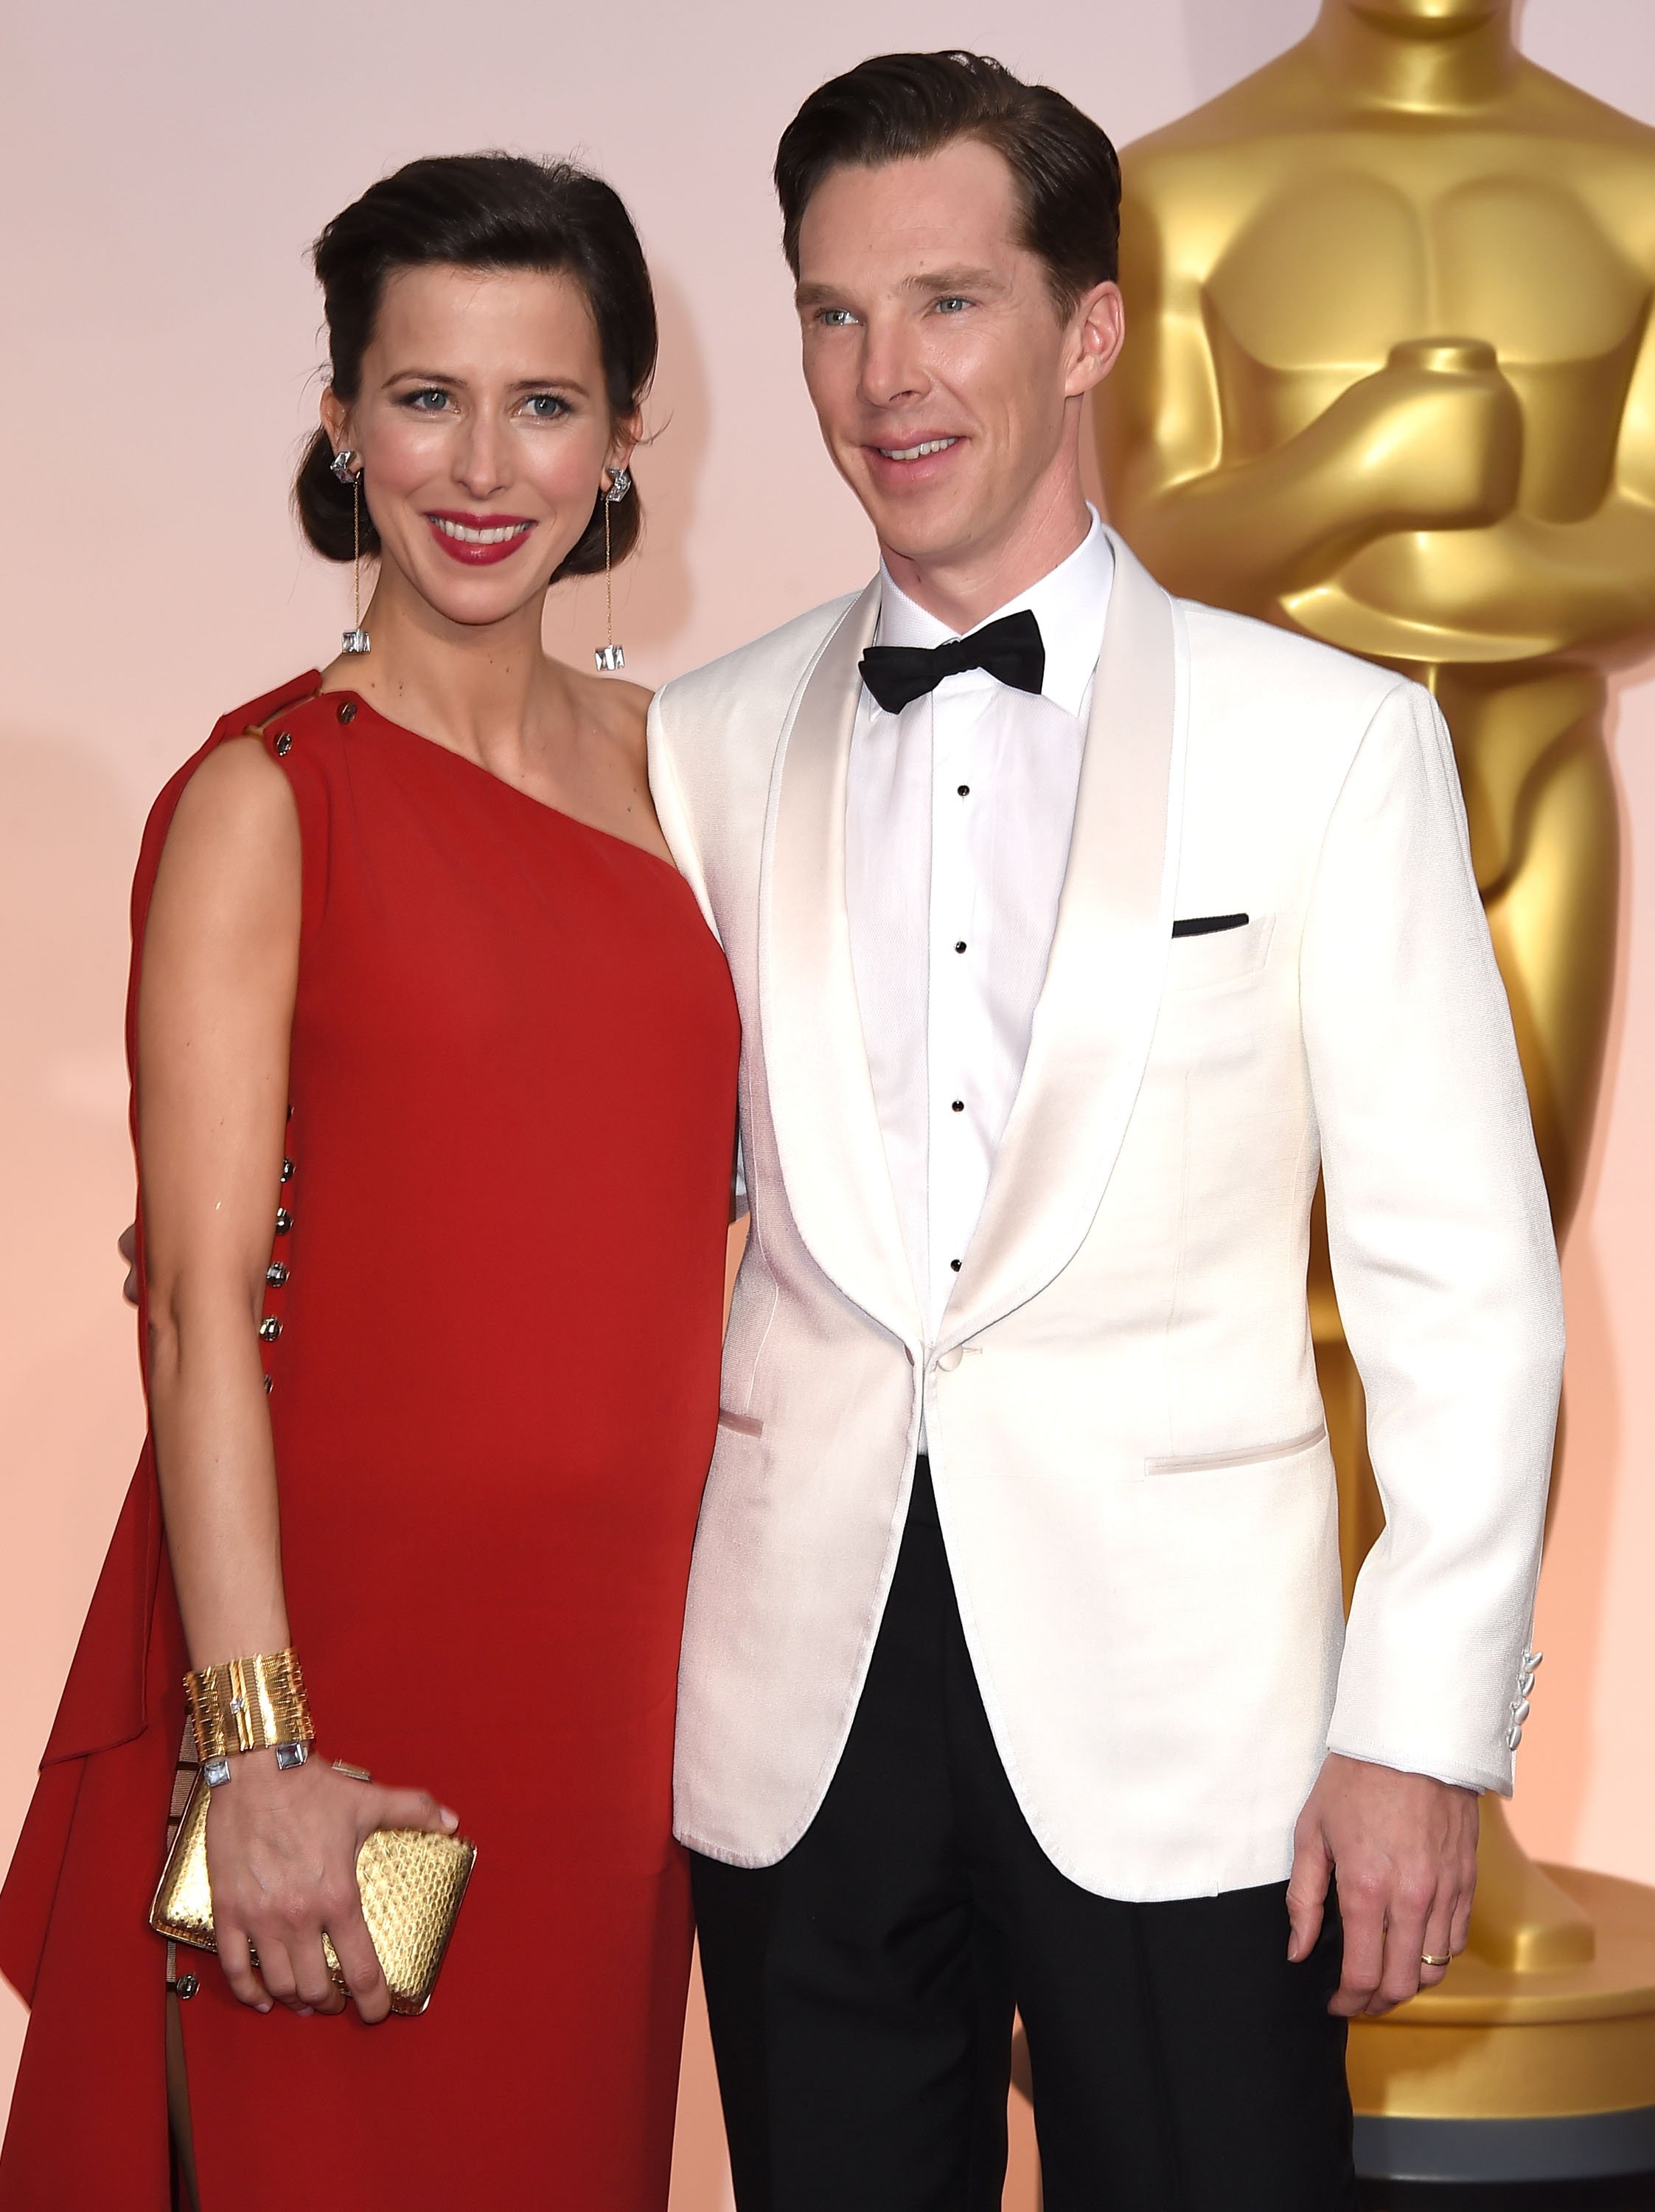 Sophie Hunter and her husband Benedict Cumberbatch,  attend the 87th Annual Academy Awards at Hollywood & Highland Center on February 22, 2015, in Hollywood, California. | Source: Getty Images